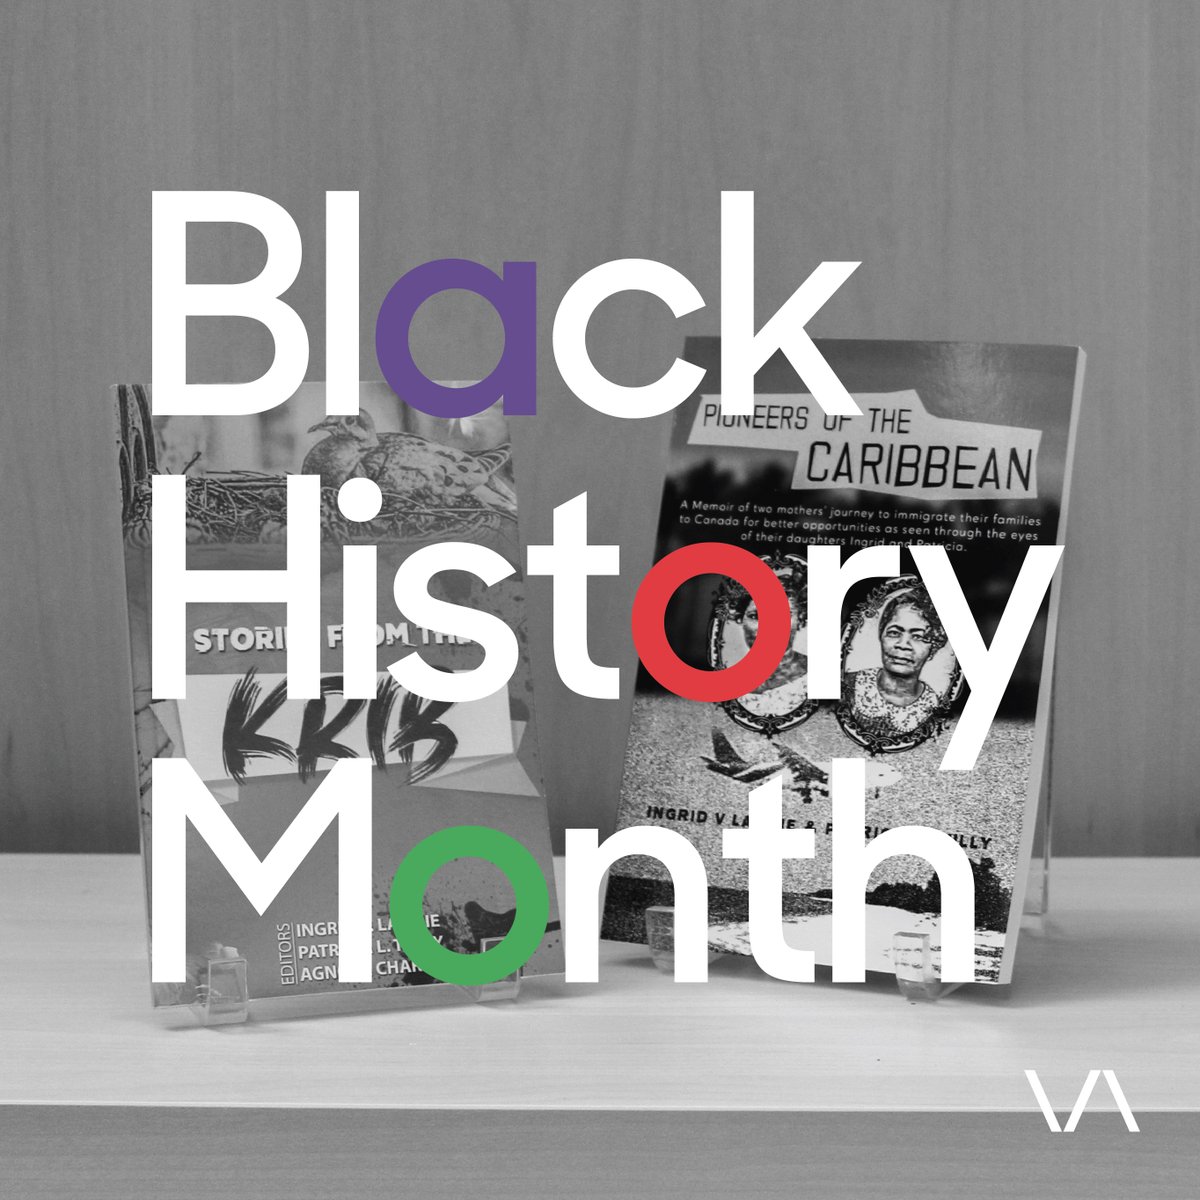 It’s Black History Month. 🎉 Join us as we honour the past, celebrate the present, and embrace the future through art and culture. Discover a rich array of weekend activities throughout this February at VarleyArtGallery.ca/News/BlackHist… #BlackHistoryMonth #VarleyArtGallery